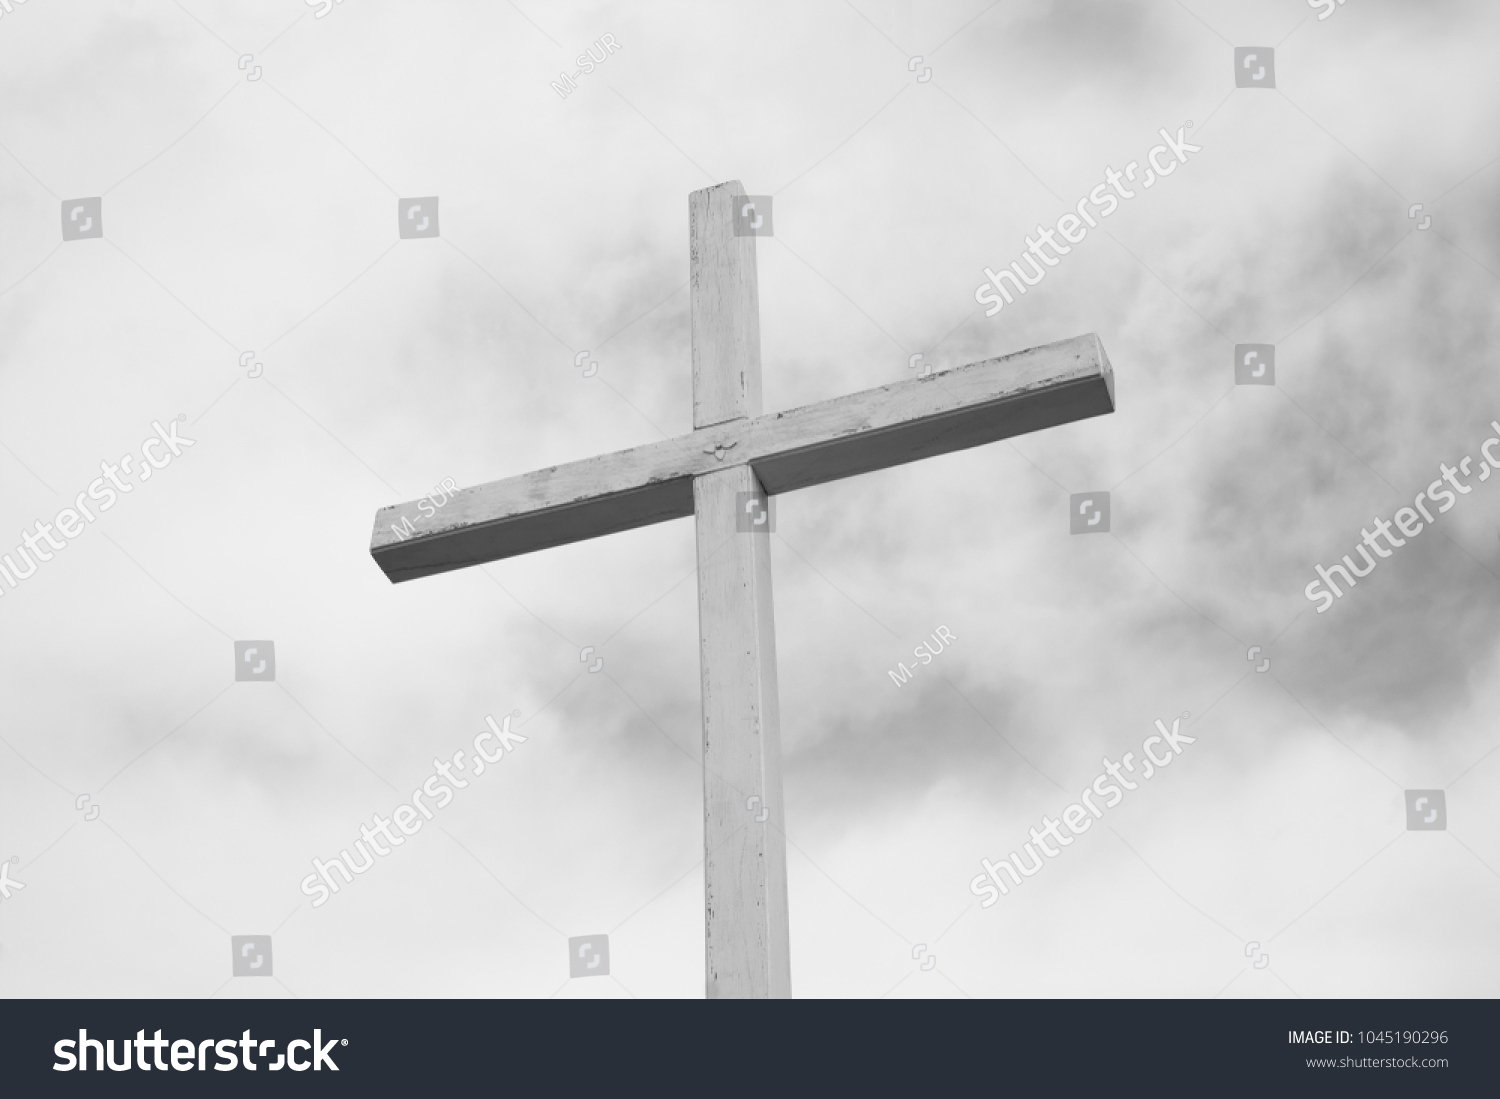 Wooden cross as religious symbol of Christianity and Christian religion - grey cloudy sky in the background. Minimalist symbolism. Low contrast #1045190296